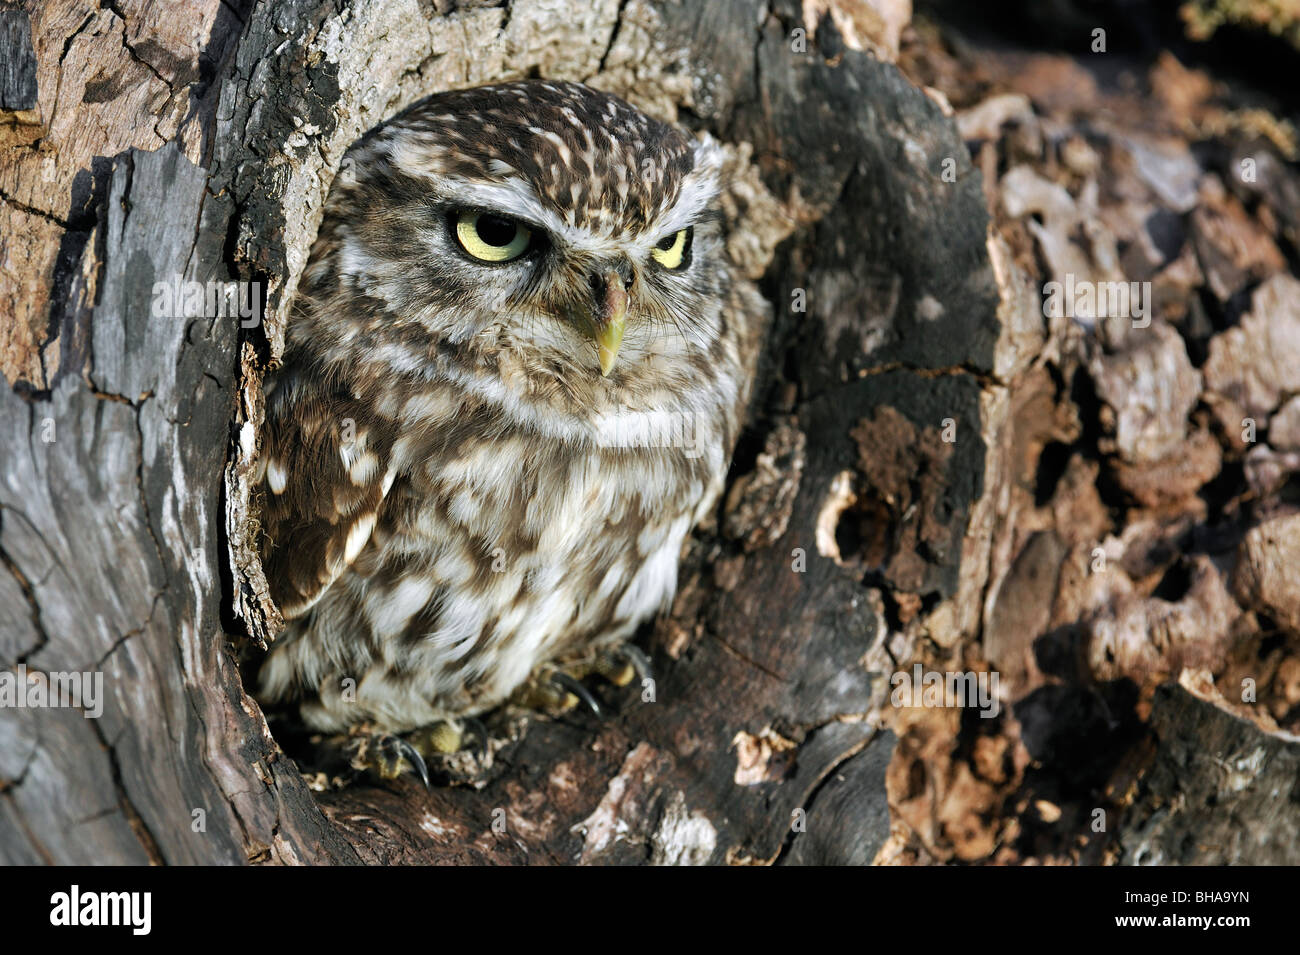 Close up of nesting Little owl (Athene noctua) sticking head out to peer from nest hole in hollow tree cavity Stock Photo